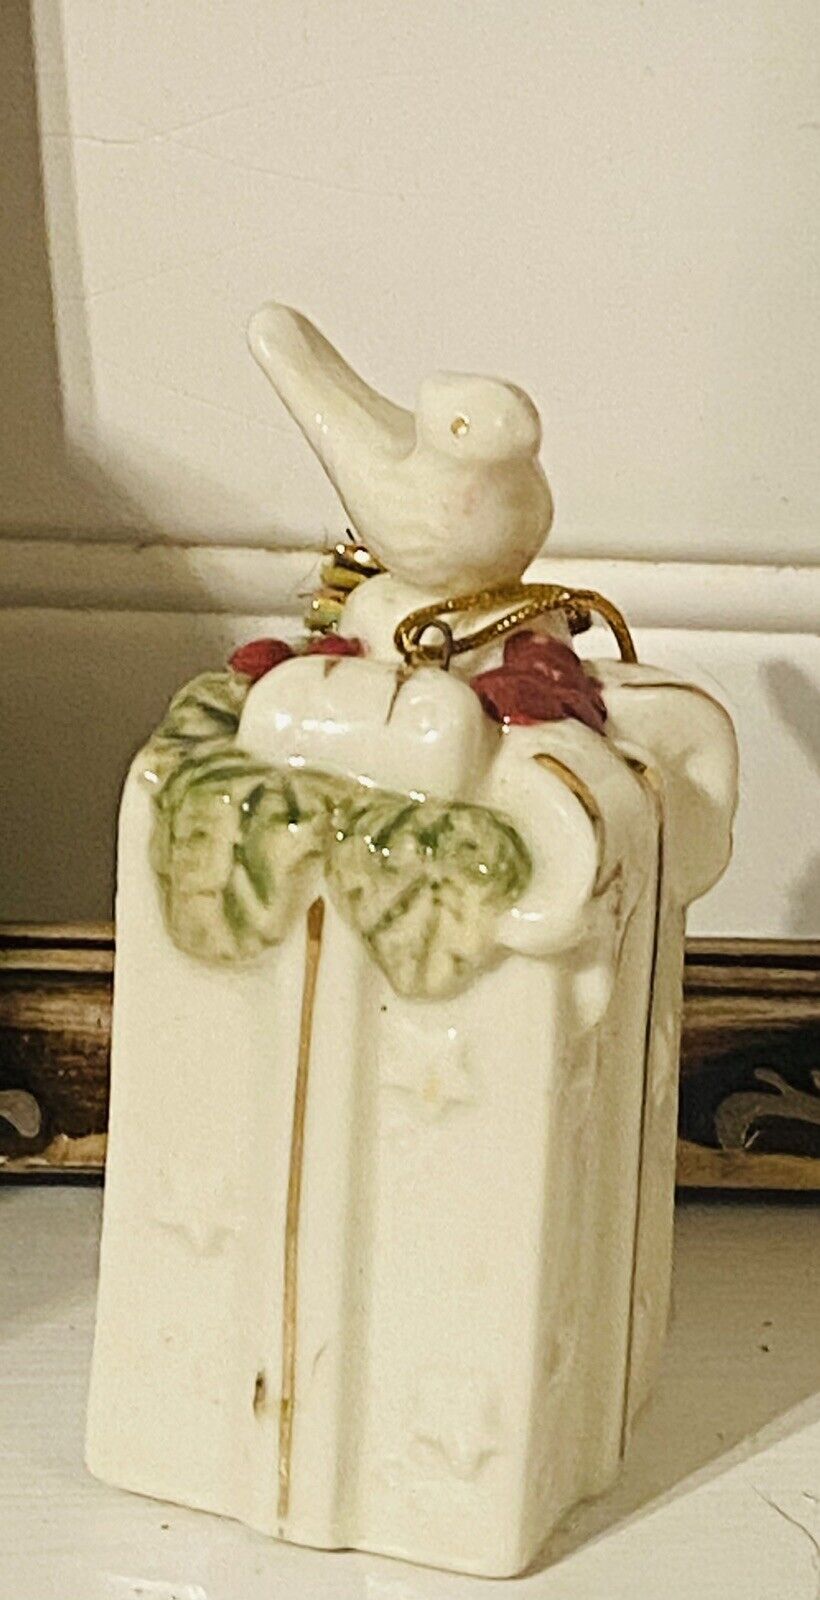 Vintage 1990s Lenox Porcelain Gift Box Ornament With Bird And Hollyberries